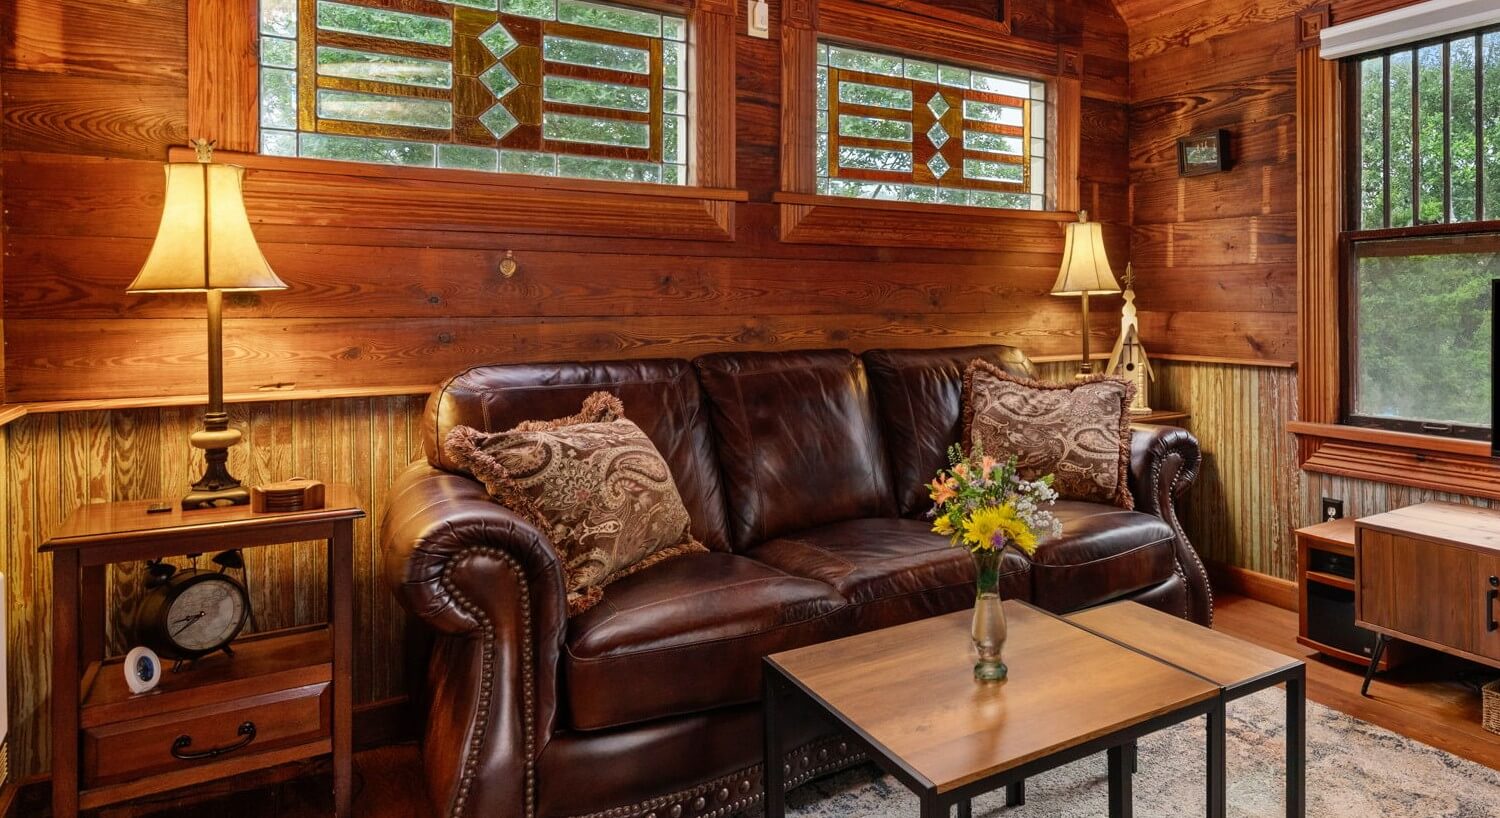 Inside of a tiny house with a leather couch and stained glass windows.